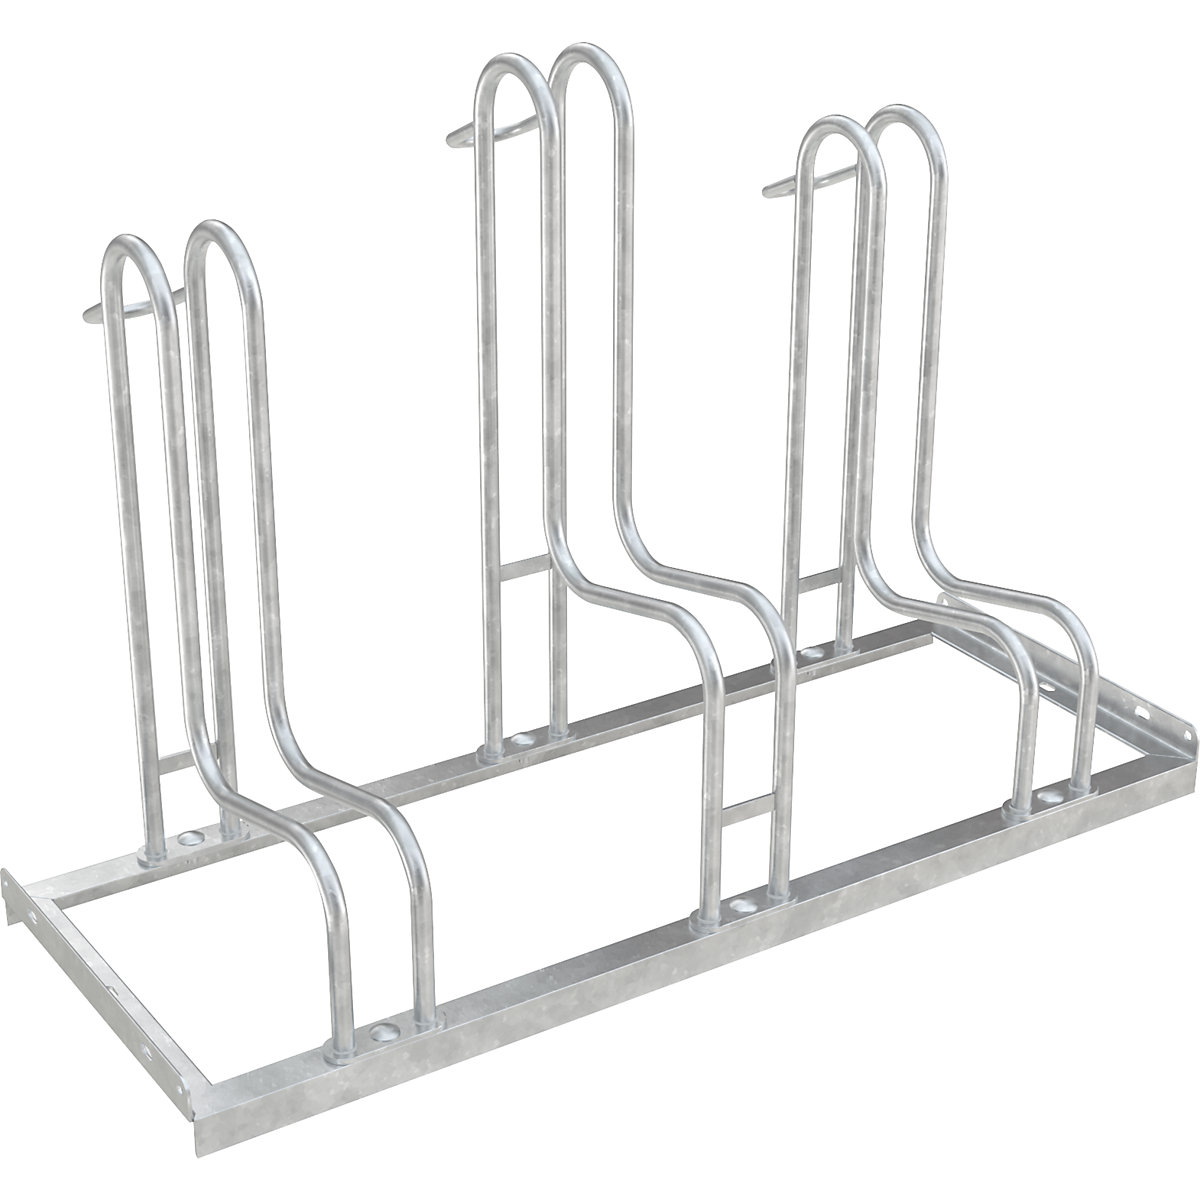 Bicycle stand, single sided, 3 parking spaces, tyre width up to 55 mm